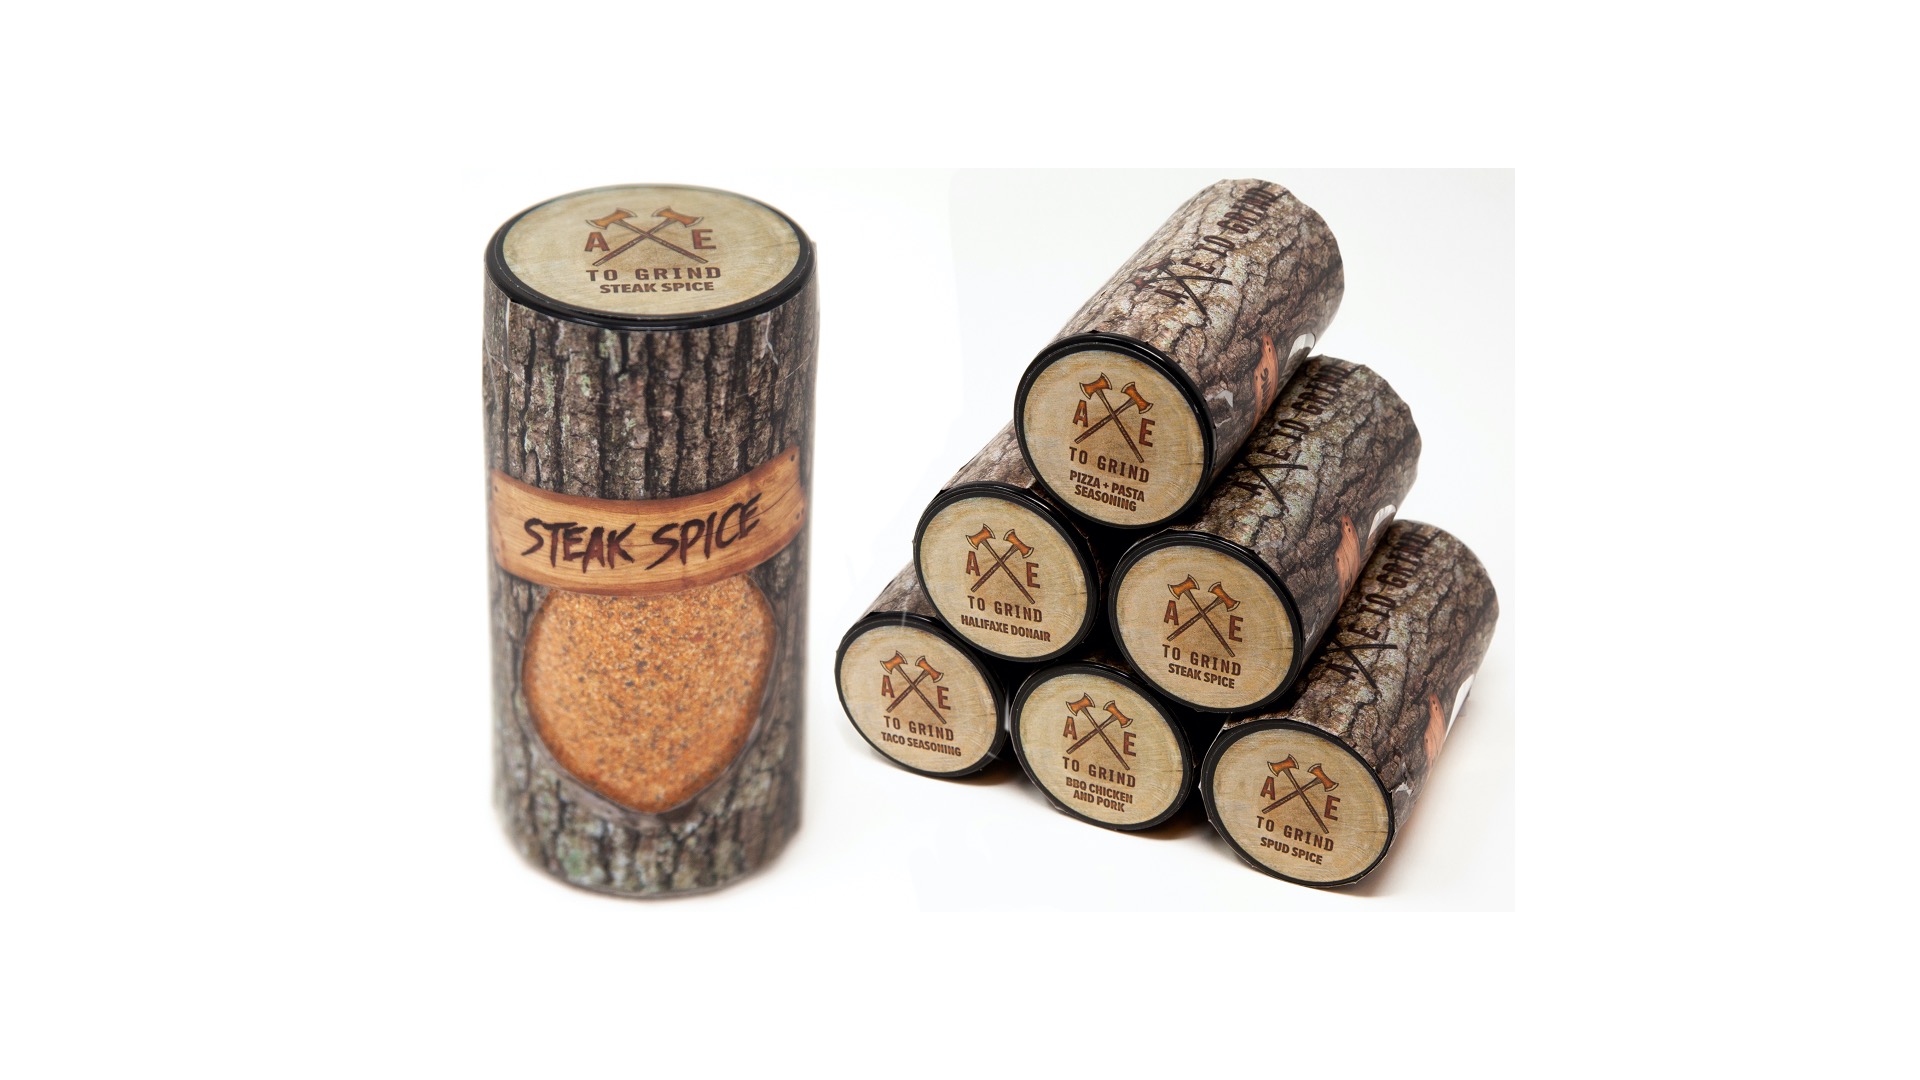 vStore feature image Axe to Grind Foods spice blends in log themed glass bottles